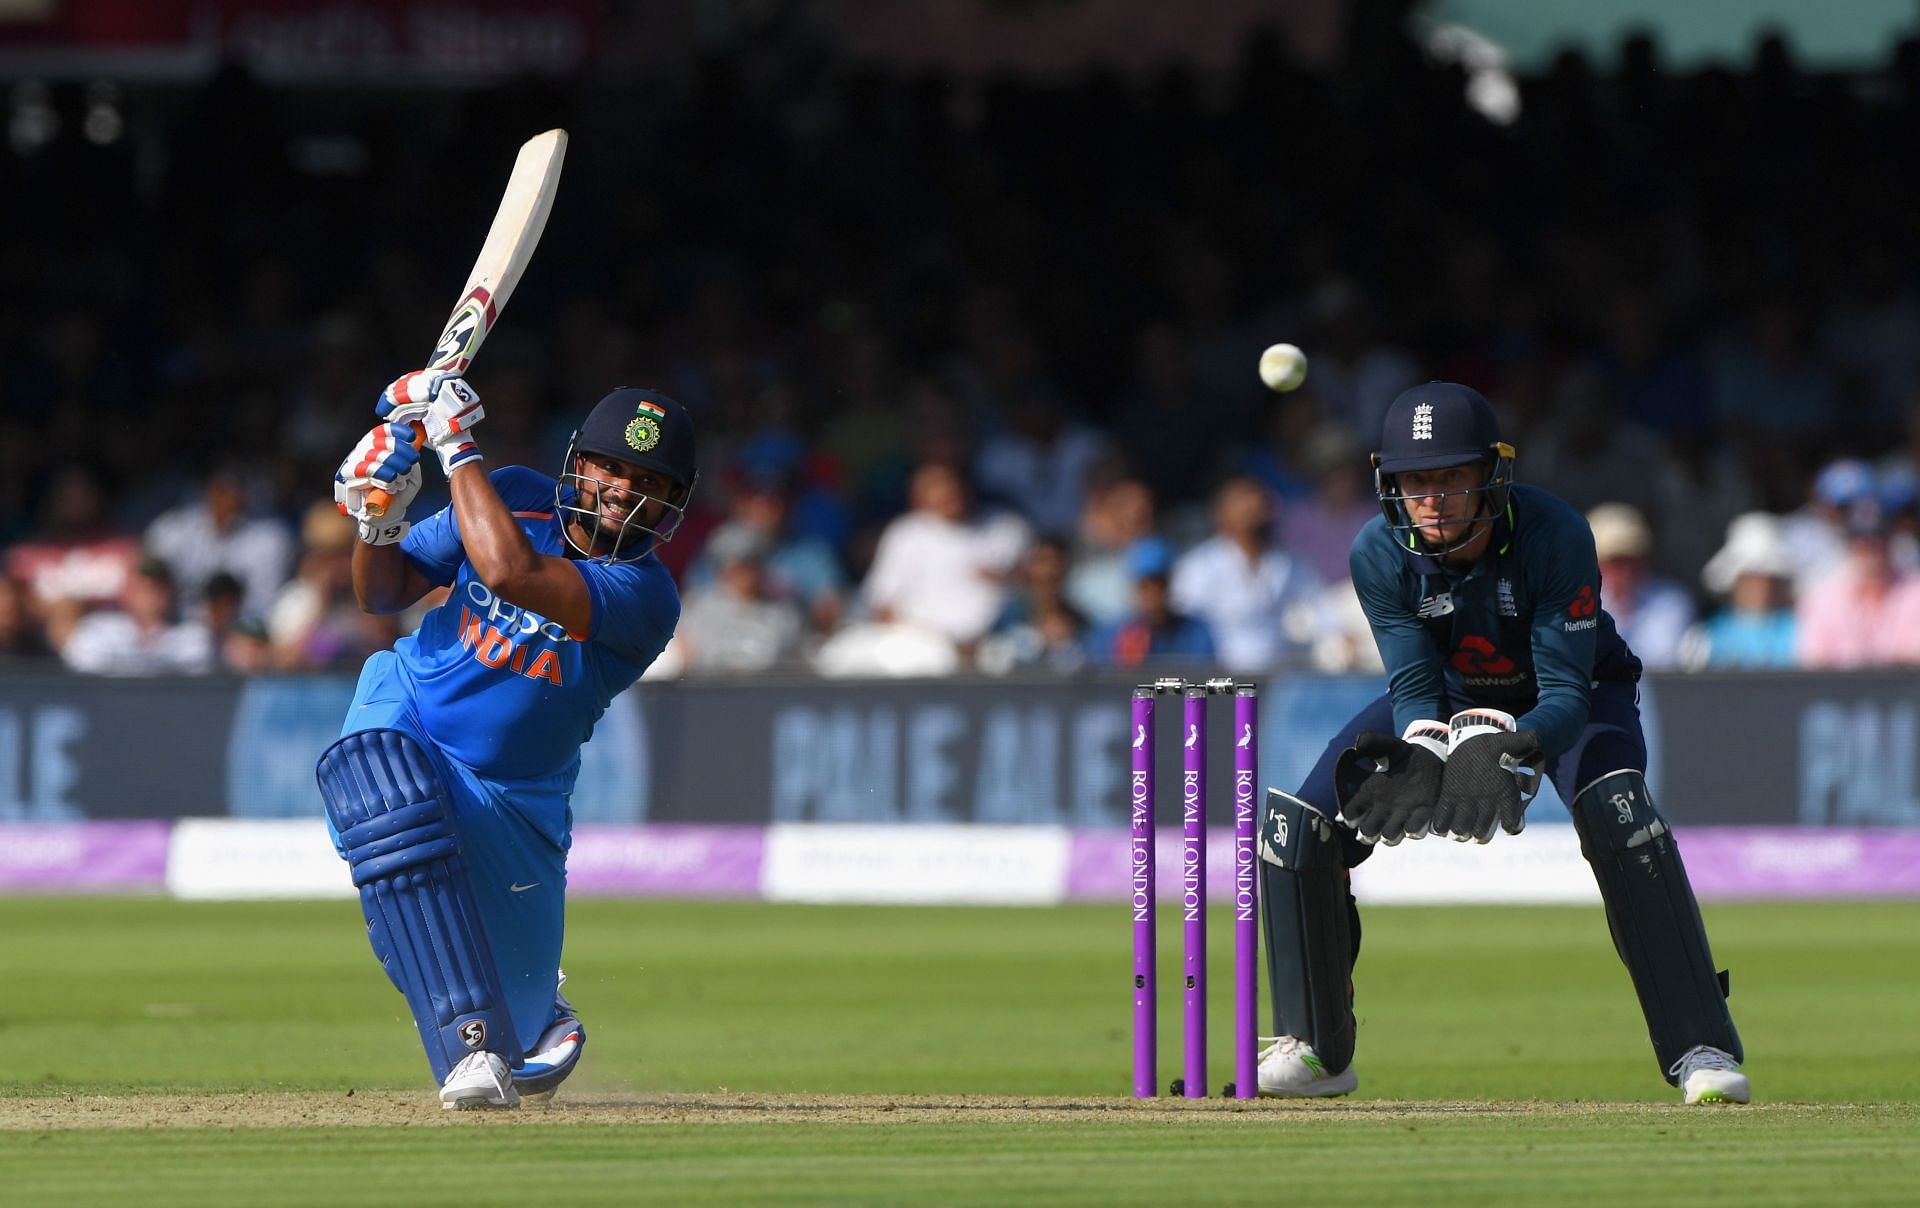 England vs India - 2nd ODI: Royal London One-Day Series (Image: Getty)